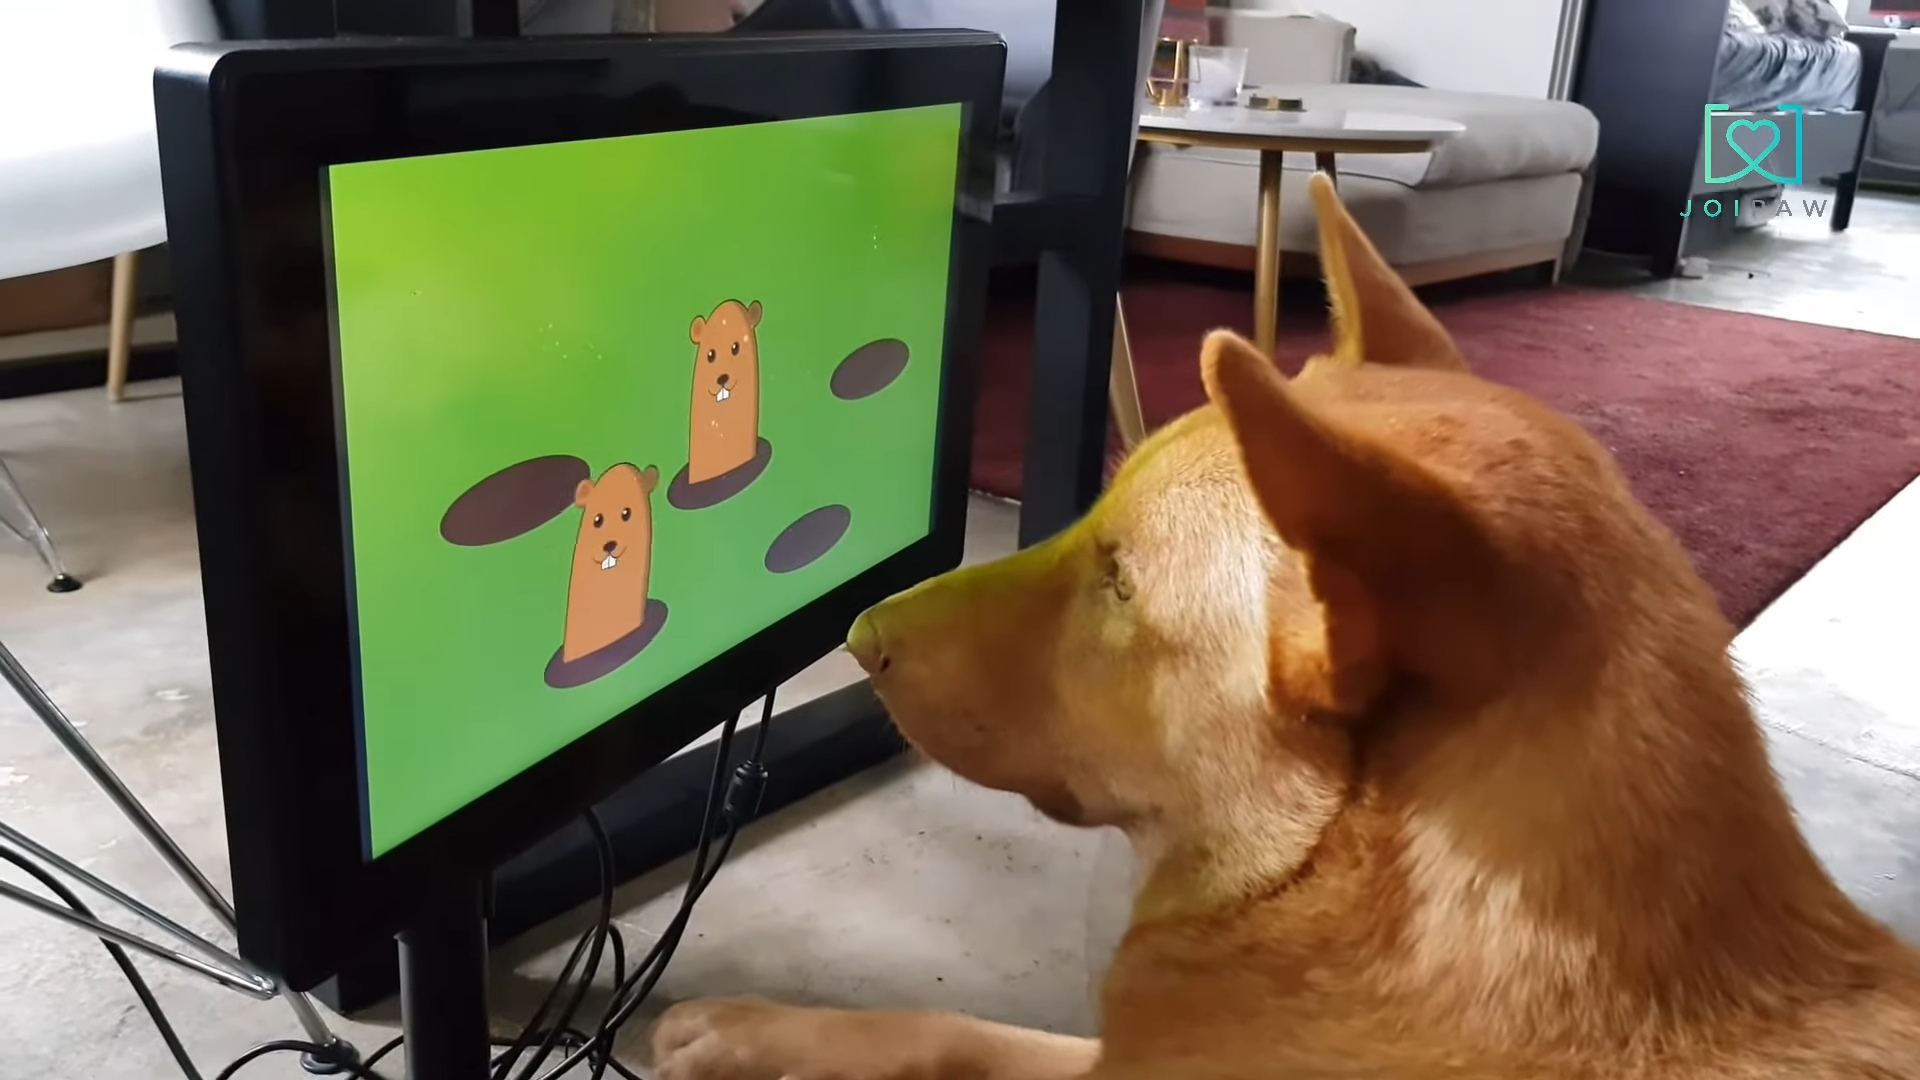 Video games for dogs are now a reality

